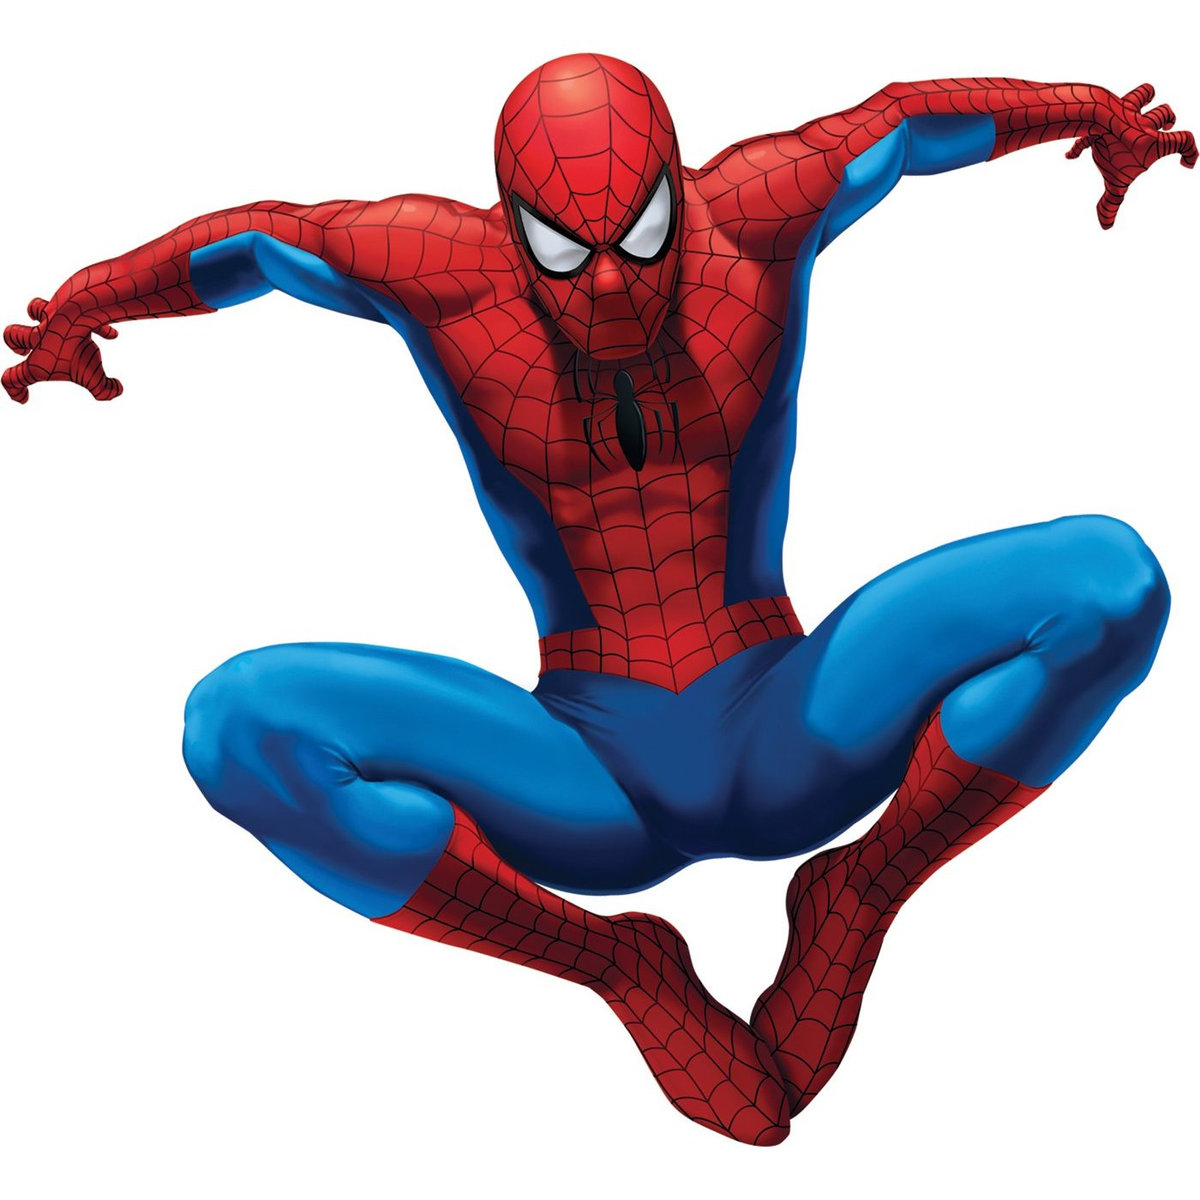 Spiderman 3 Game Download For Pc Highly Compressed